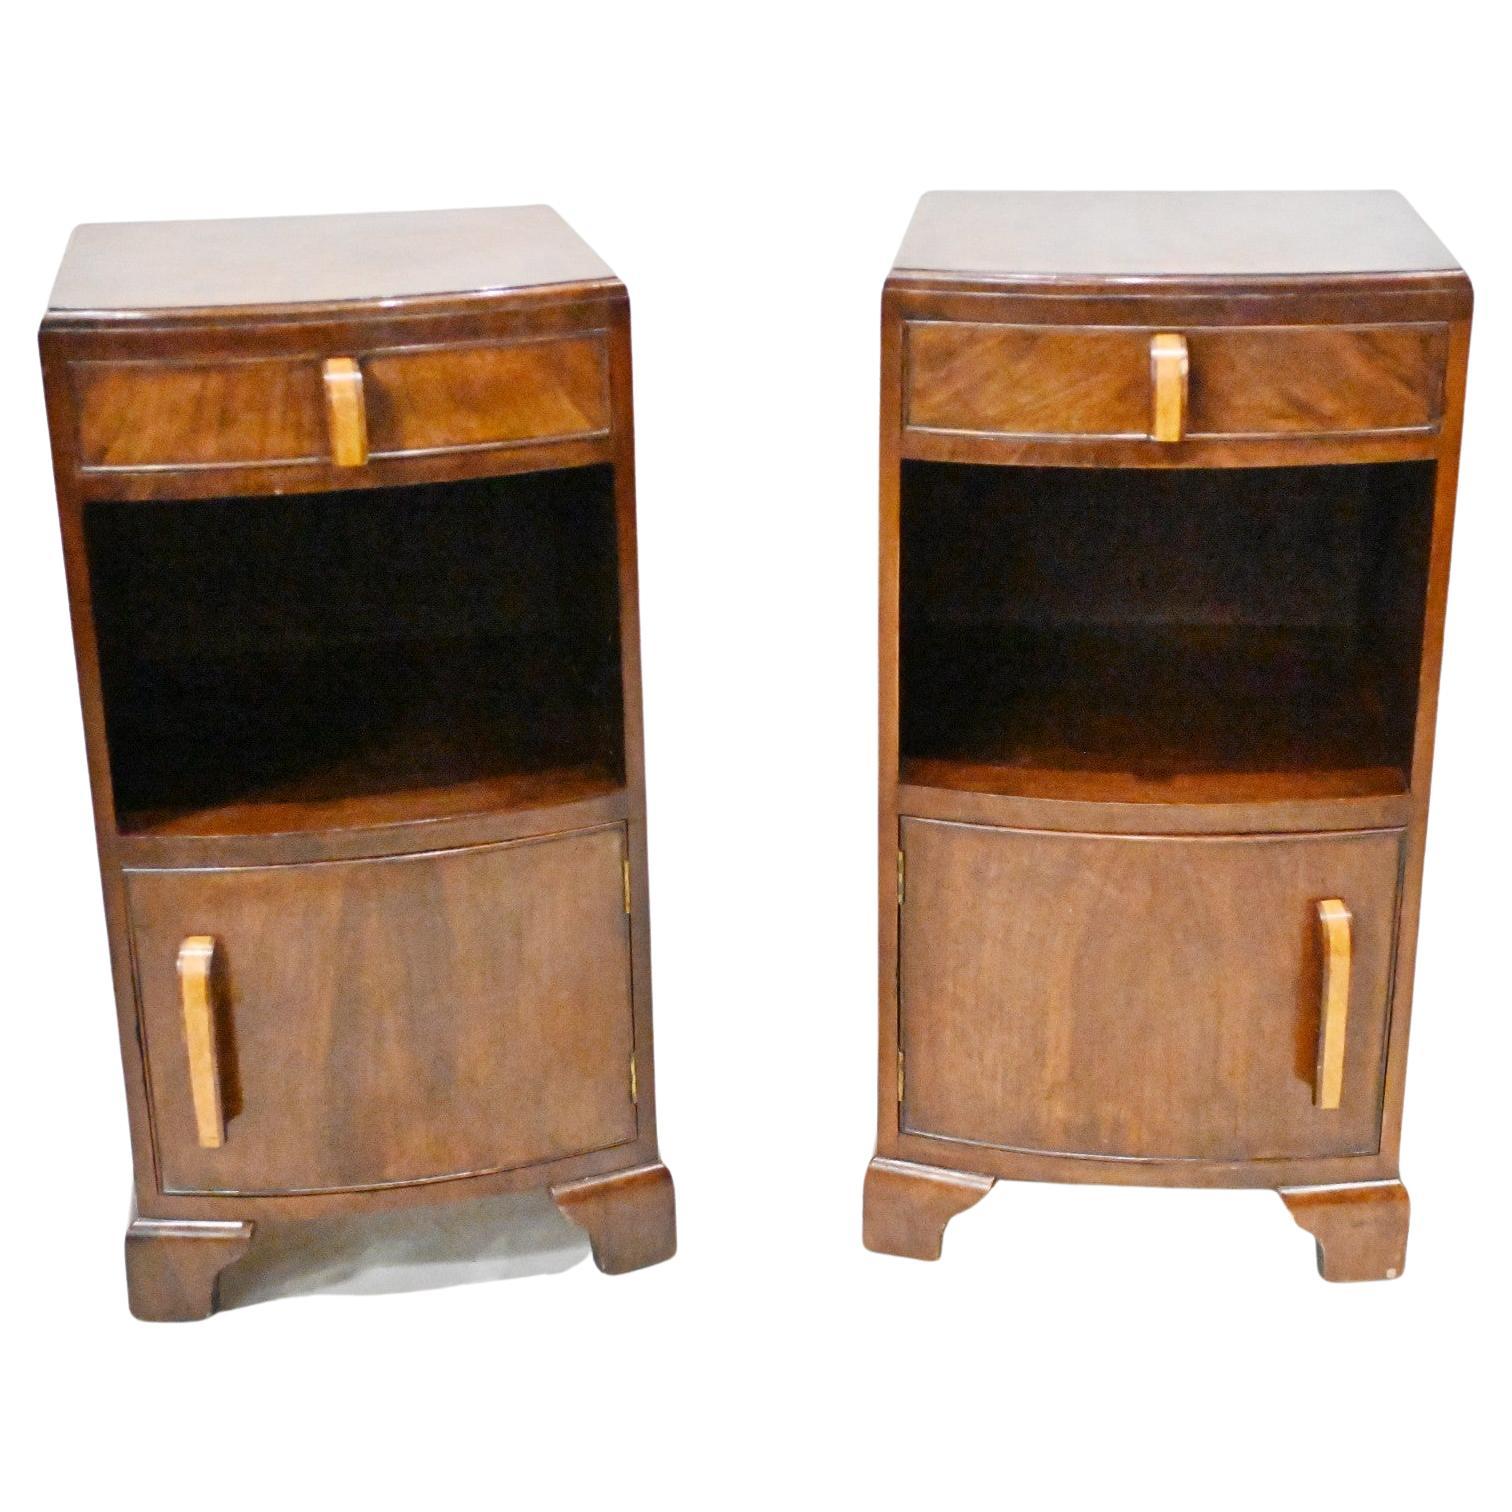 Pair Period Art Deco Bedside Cabinets Nightstands 1920s For Sale